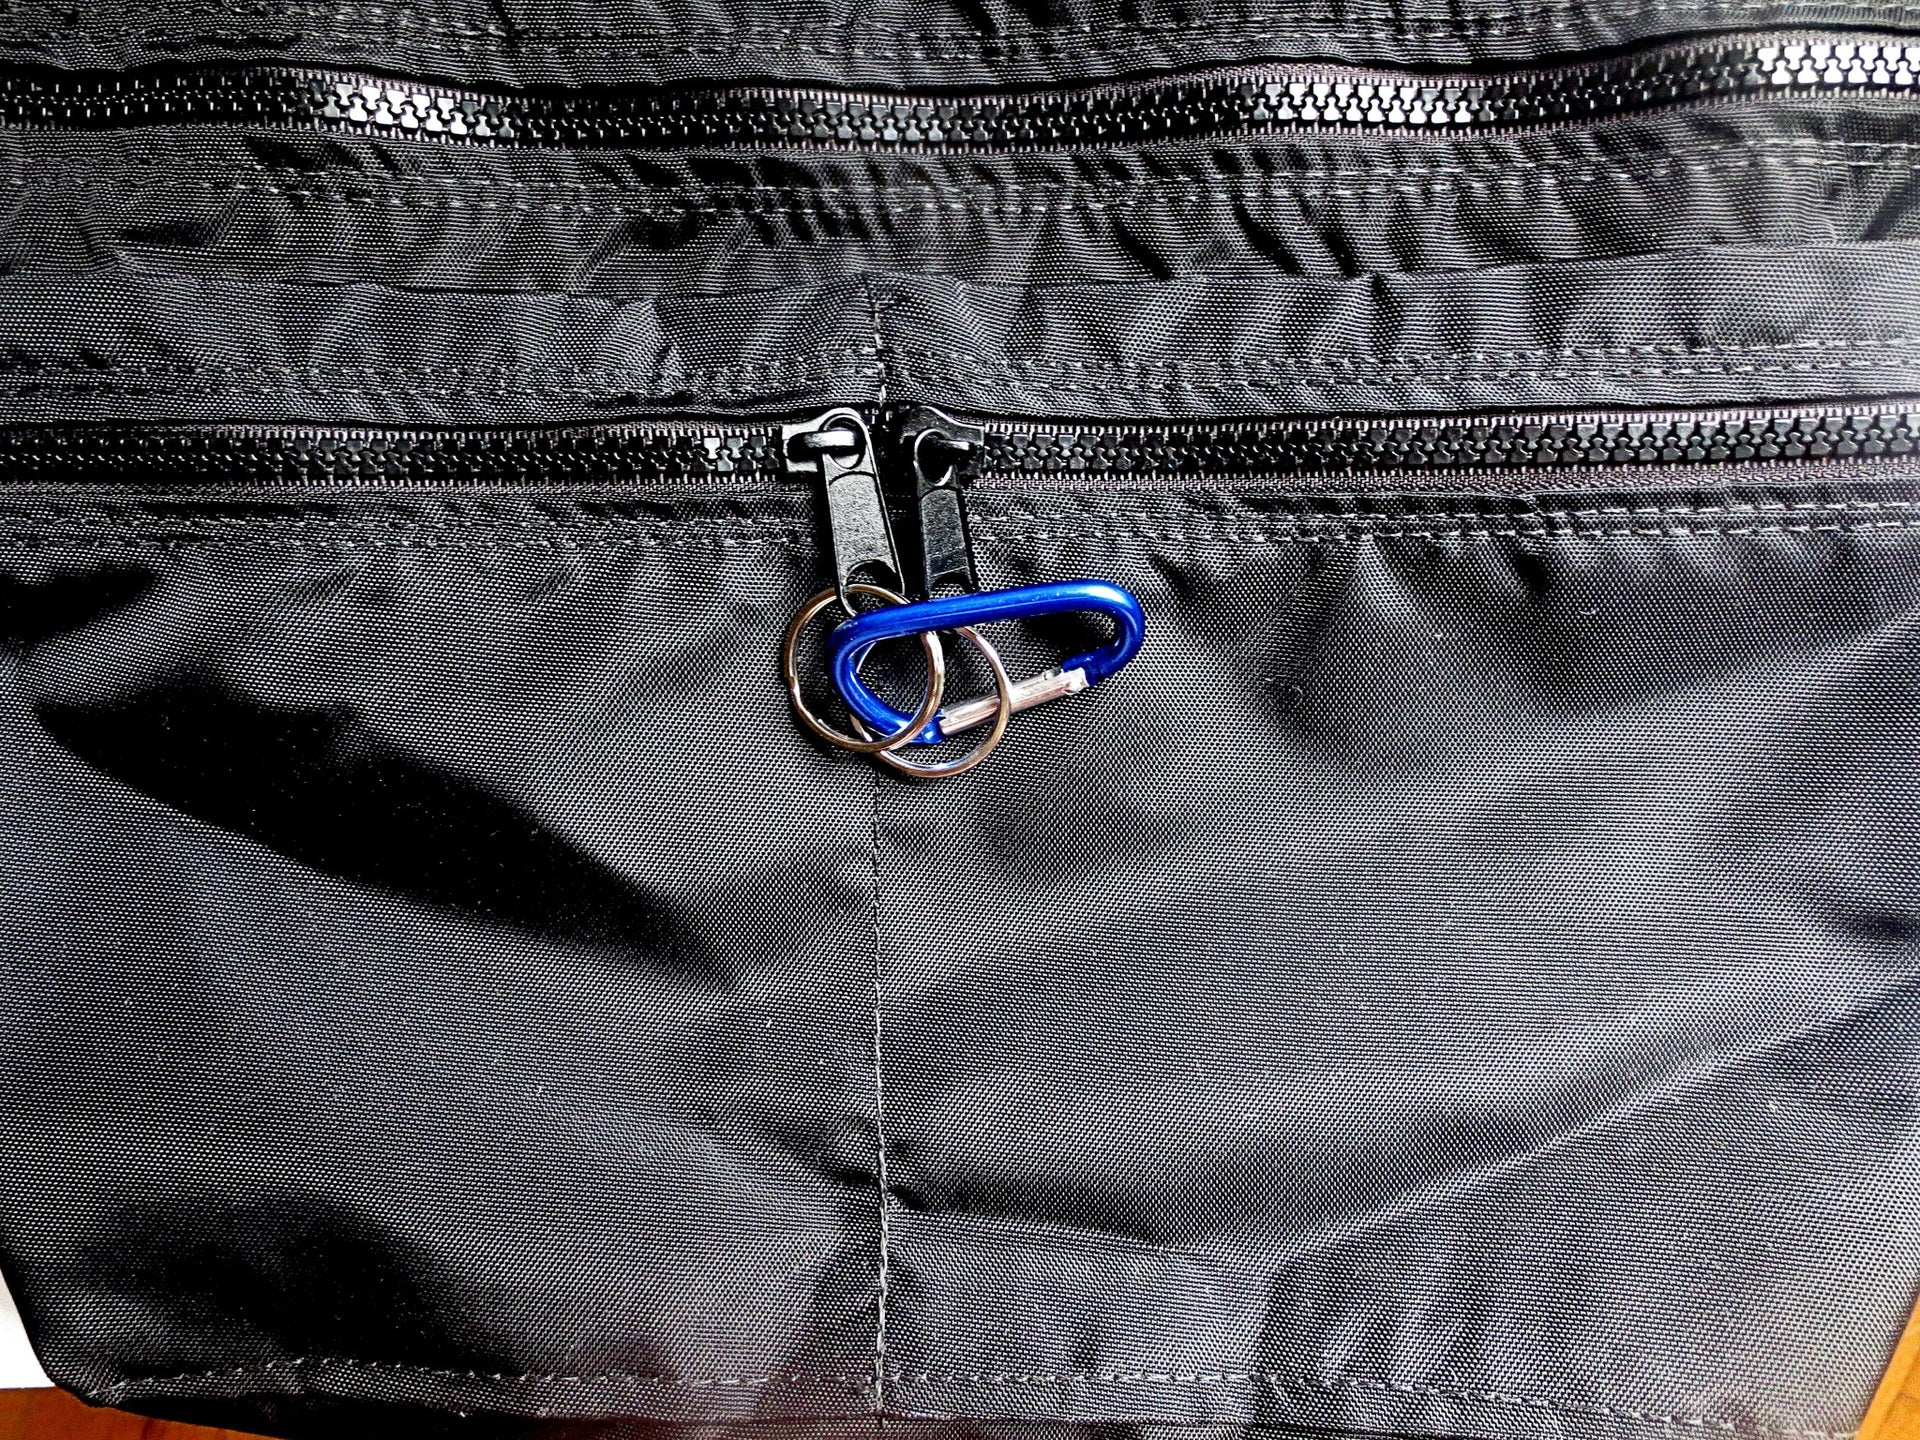 sling to waist packs --- great as a purse/pocketbook, awesome for travel and on the go!